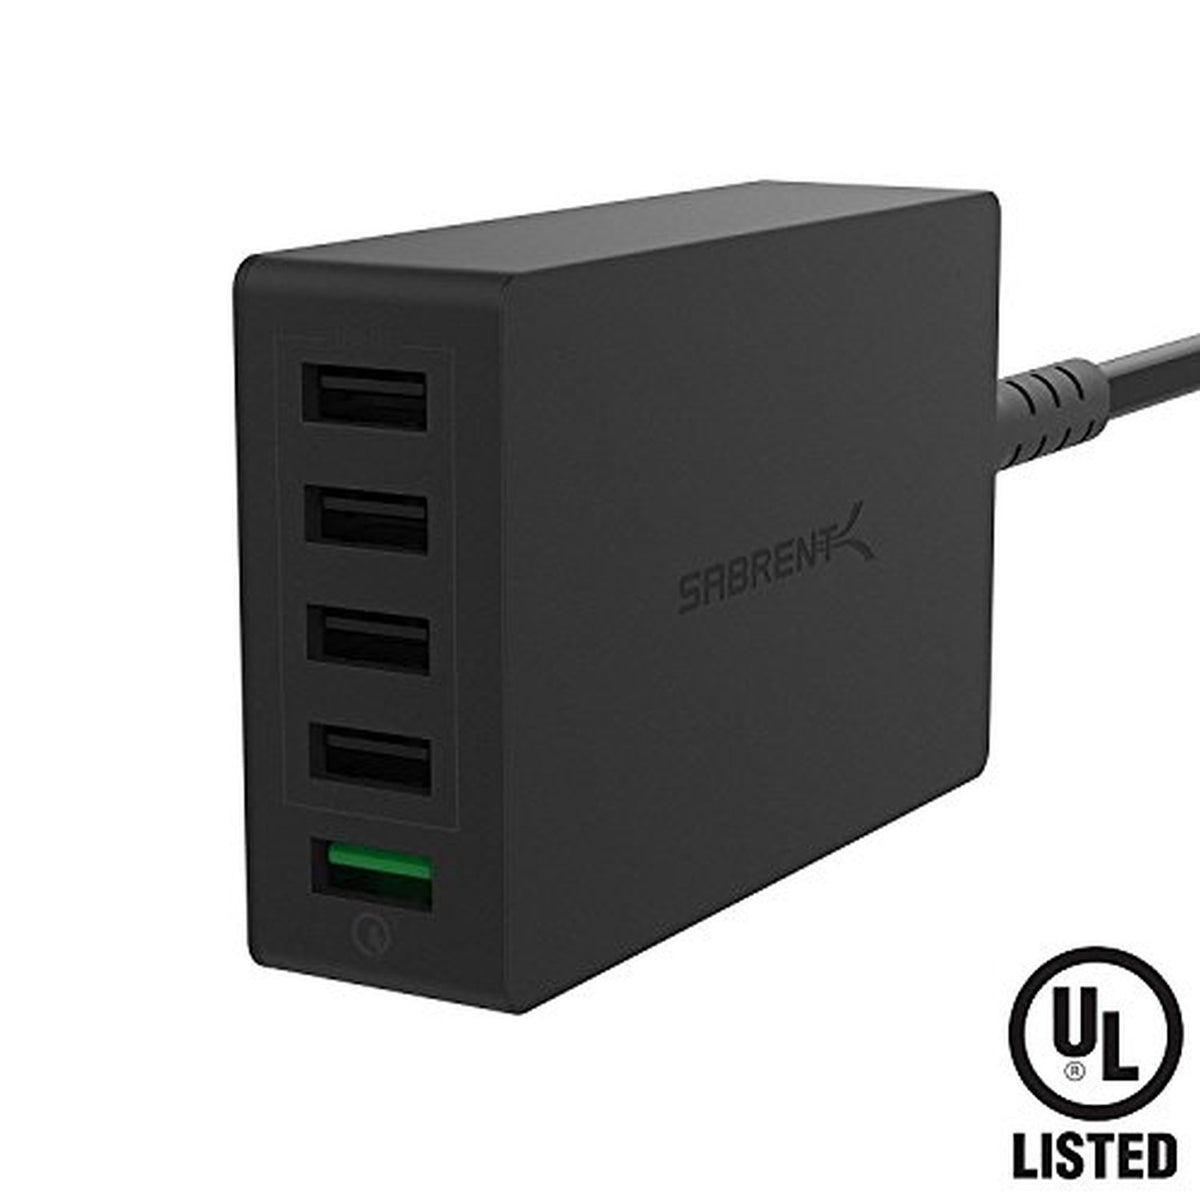 Quick Charge 3.0 [UL Certified] 54W 5-Port Family-Sized Desktop USB Rapid Charger. Smart USB Charger with Auto Detect Technology